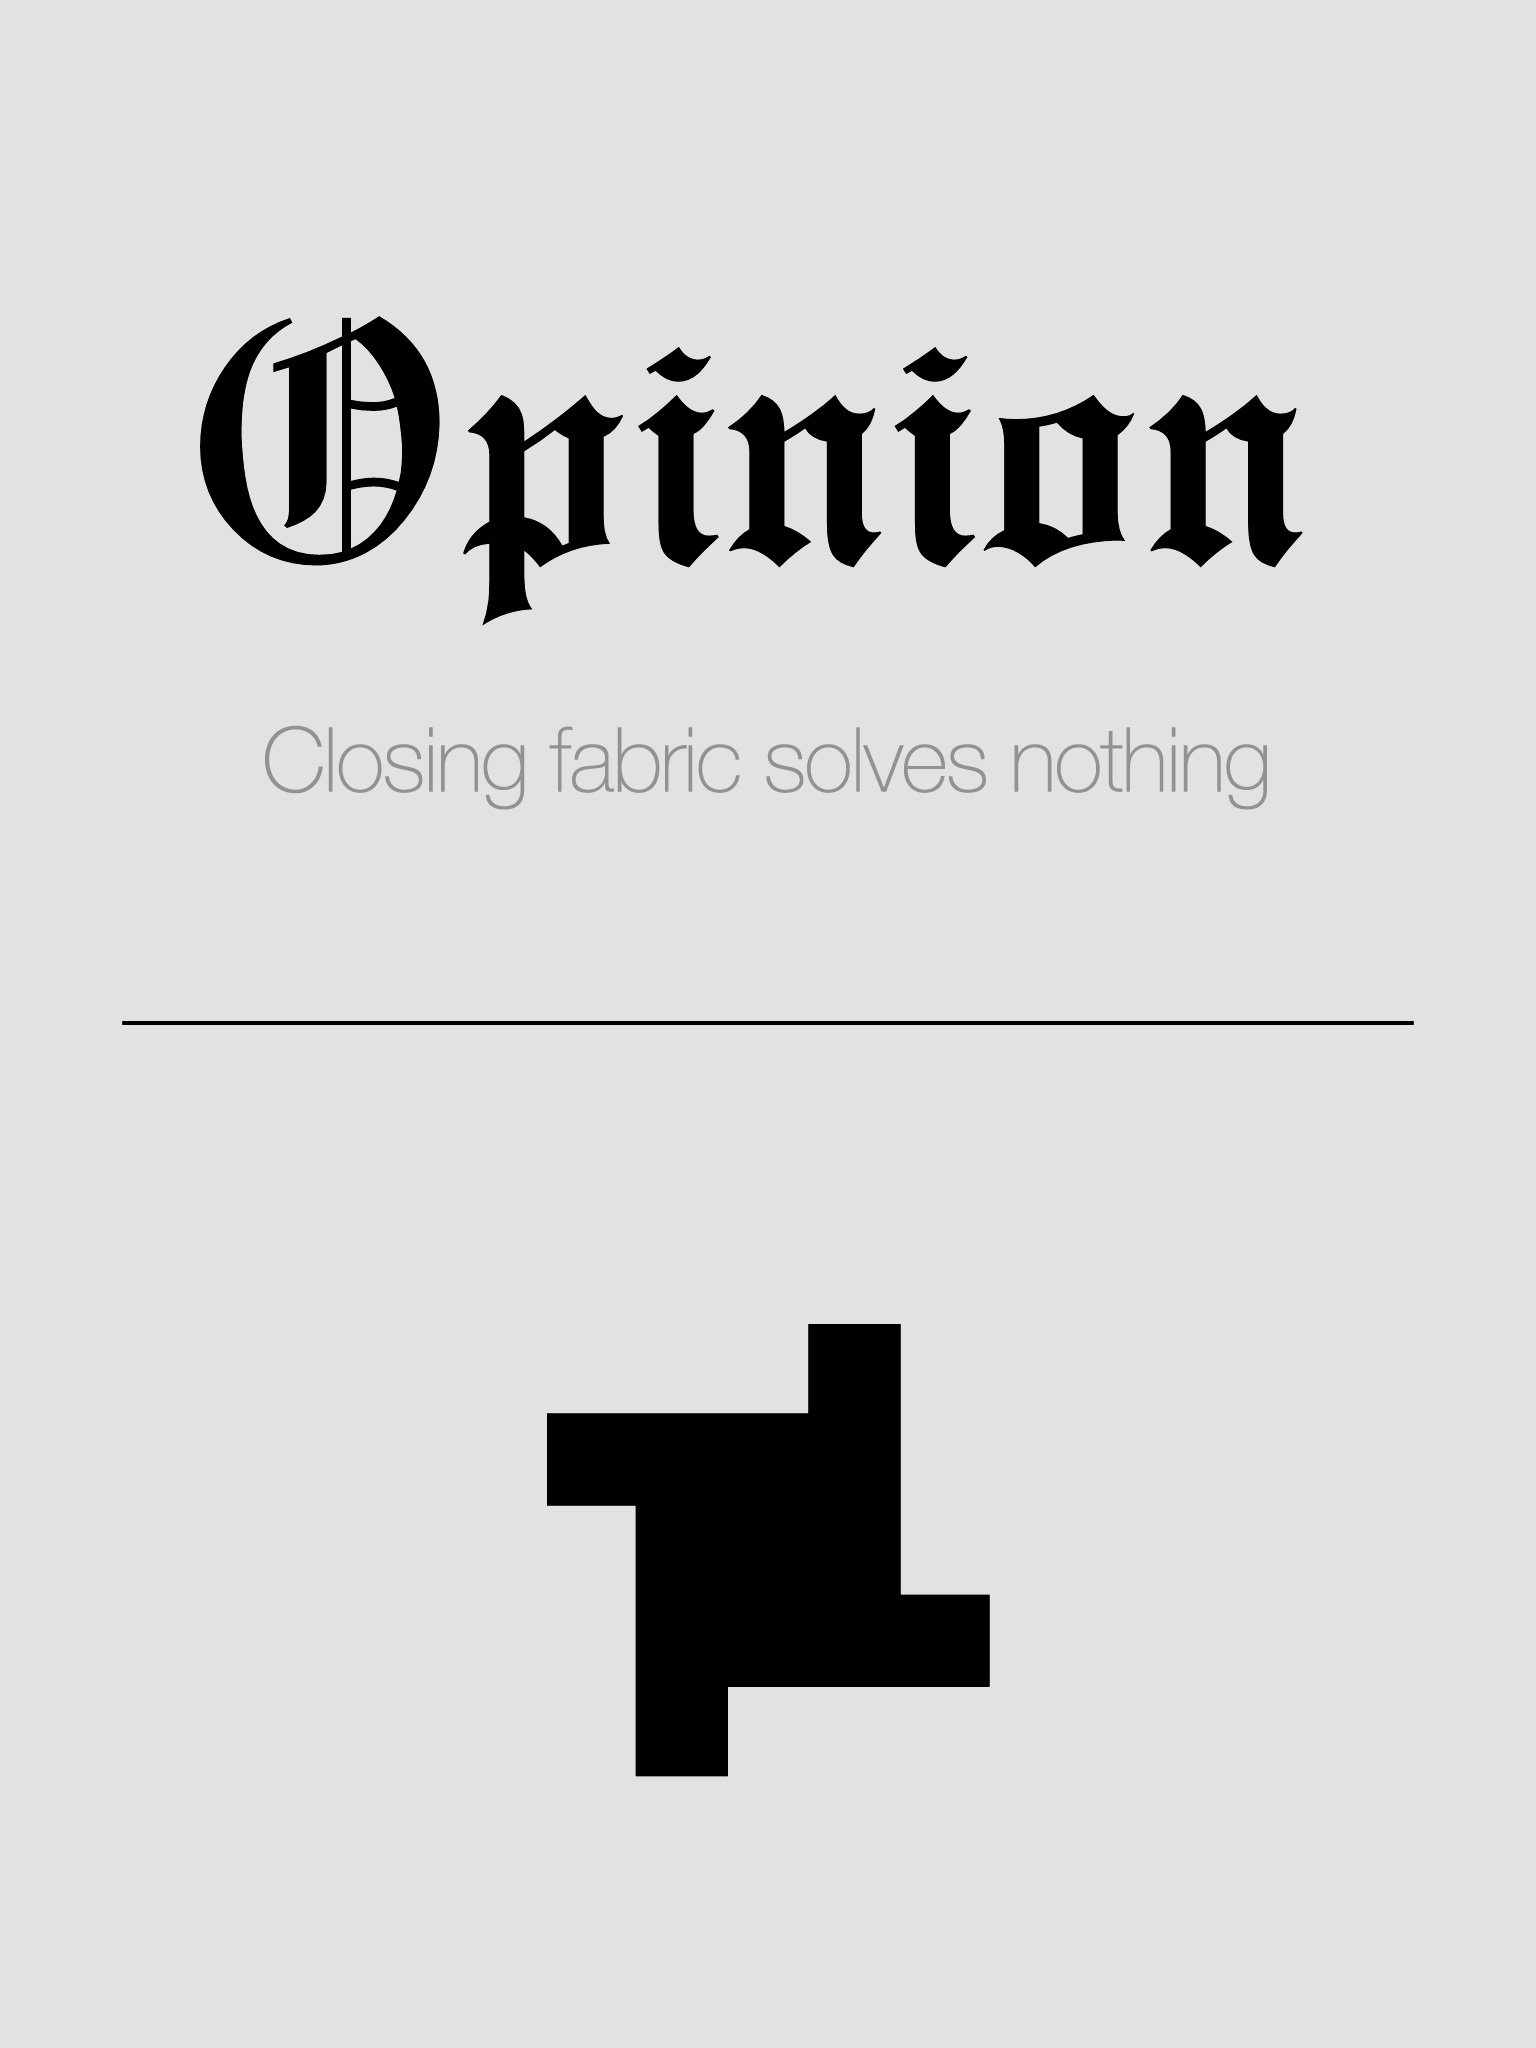 Opinion: Closing fabric solves nothing